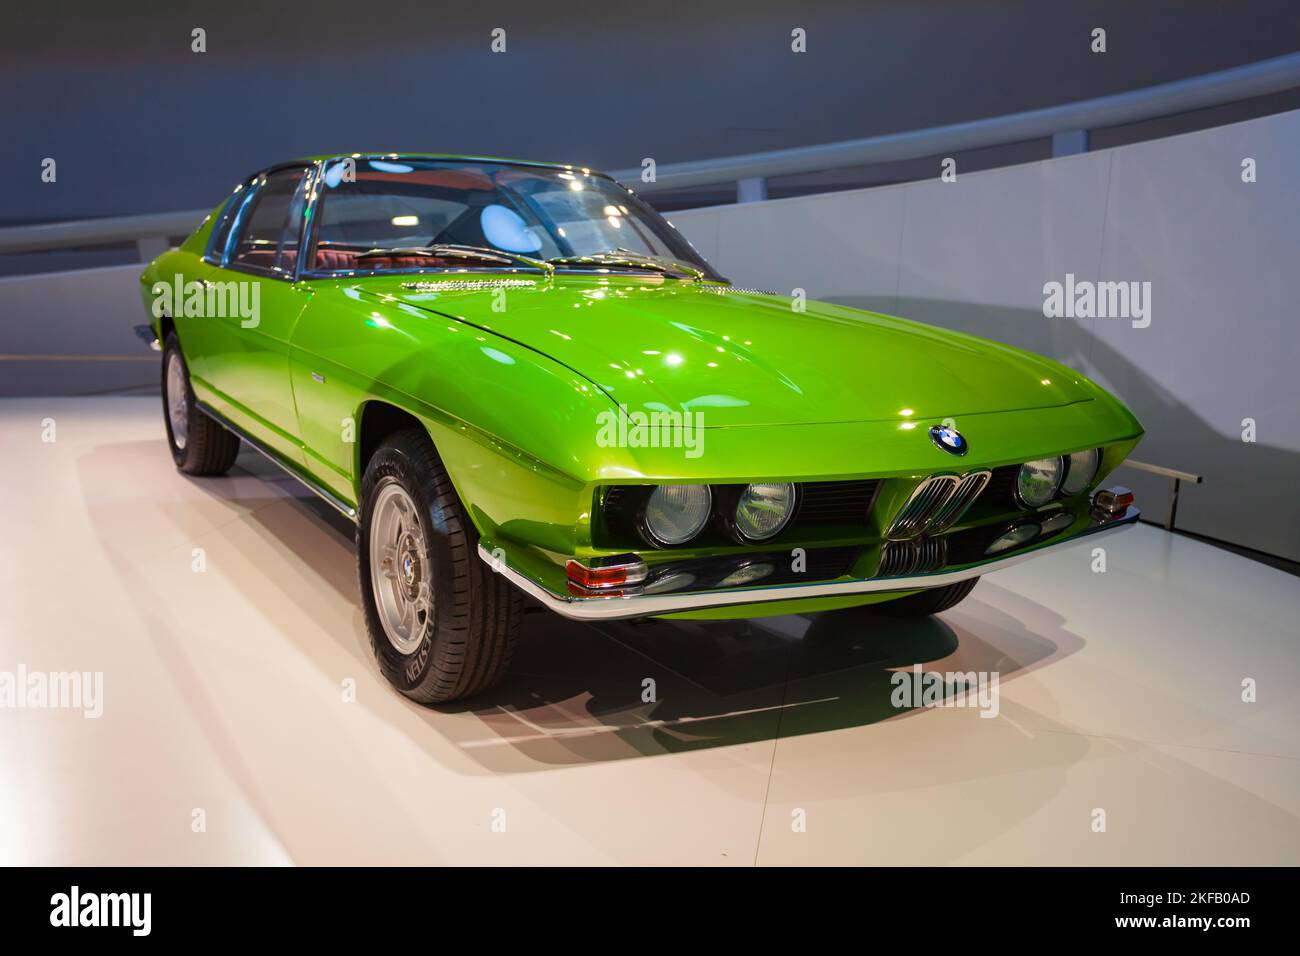 Munich, Germany - July 08, 2021: BMW Garmisch 2019 concept car rebuild at BMW Museum. It is an automobile museum of BMW history near the Olympiapark i Stock Photo